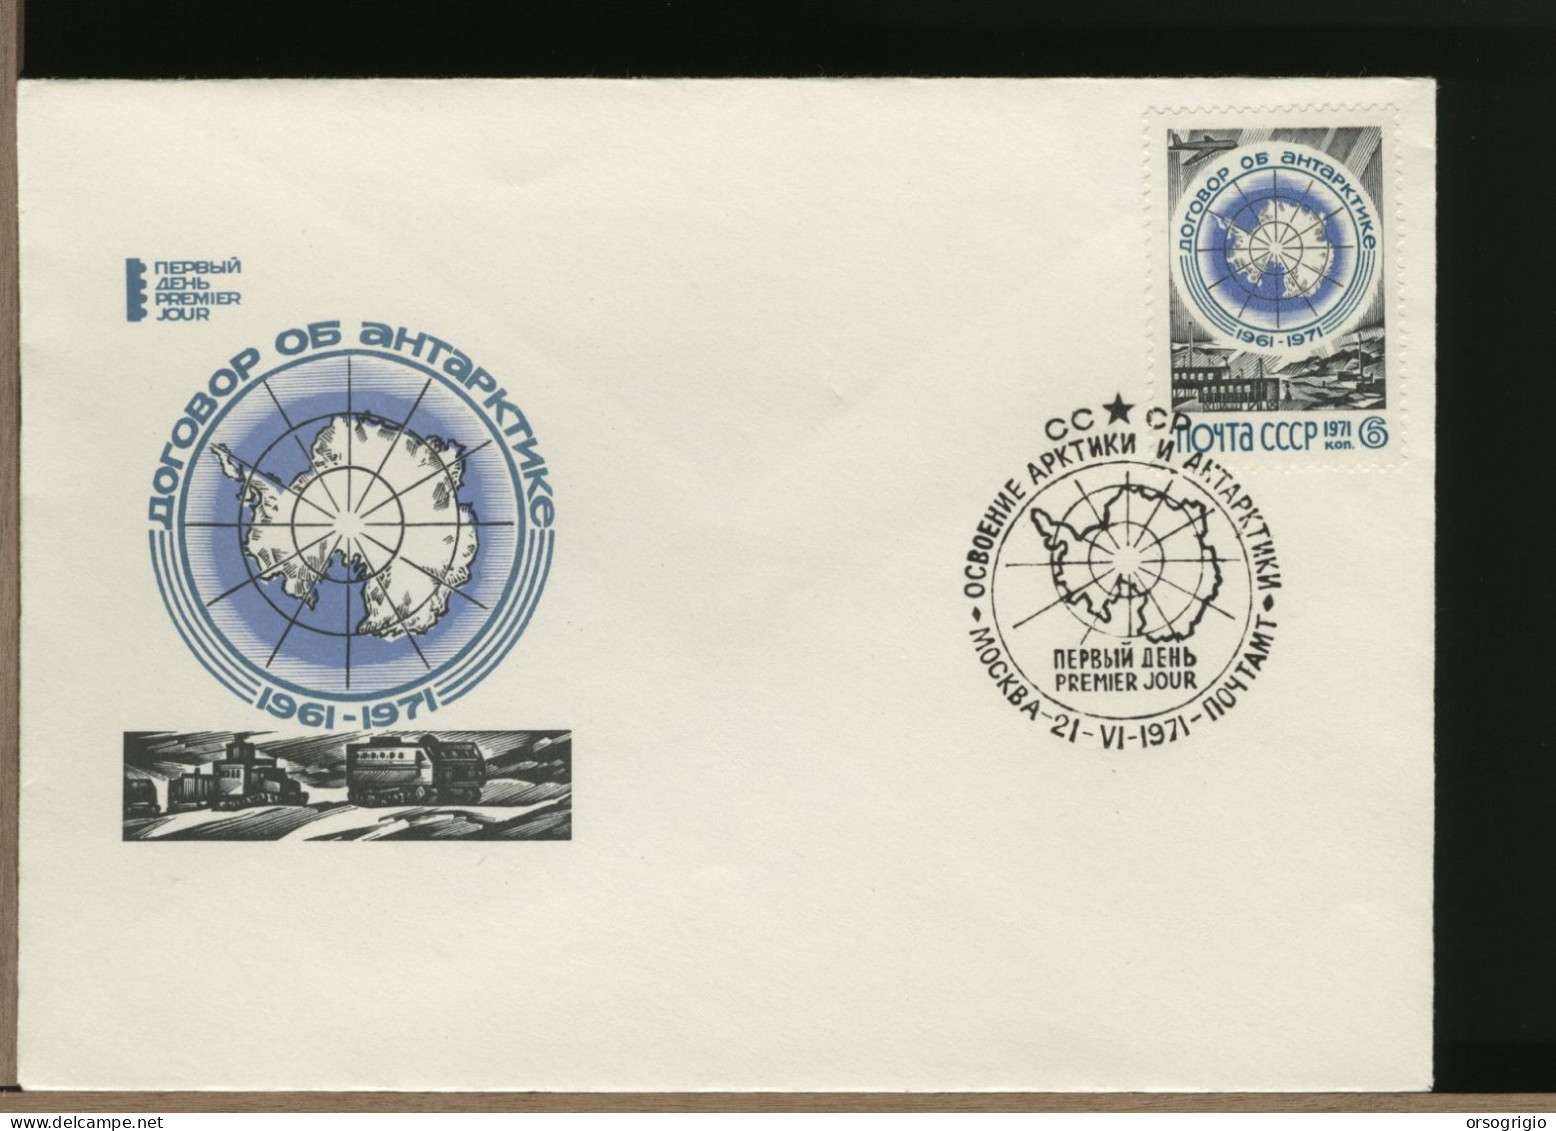 RUSSIA CCCP - FDC 1971 - SOUTH POLE - Antarctische Expedities